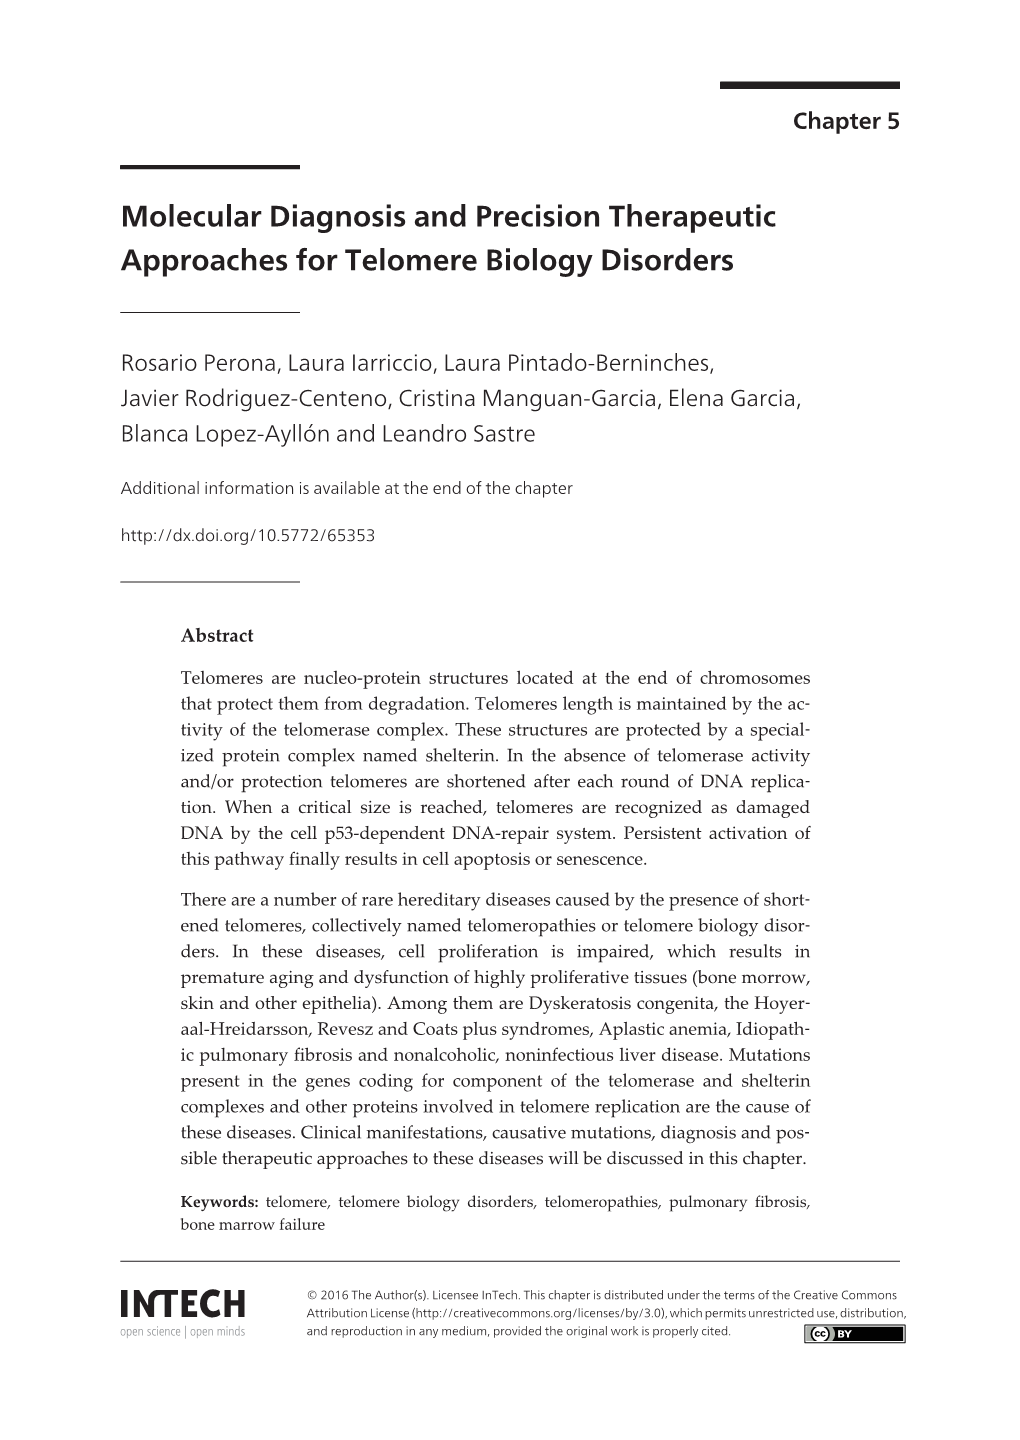 Molecular Diagnosis and Precision Therapeutic Approaches for Telomere Biology Disorders